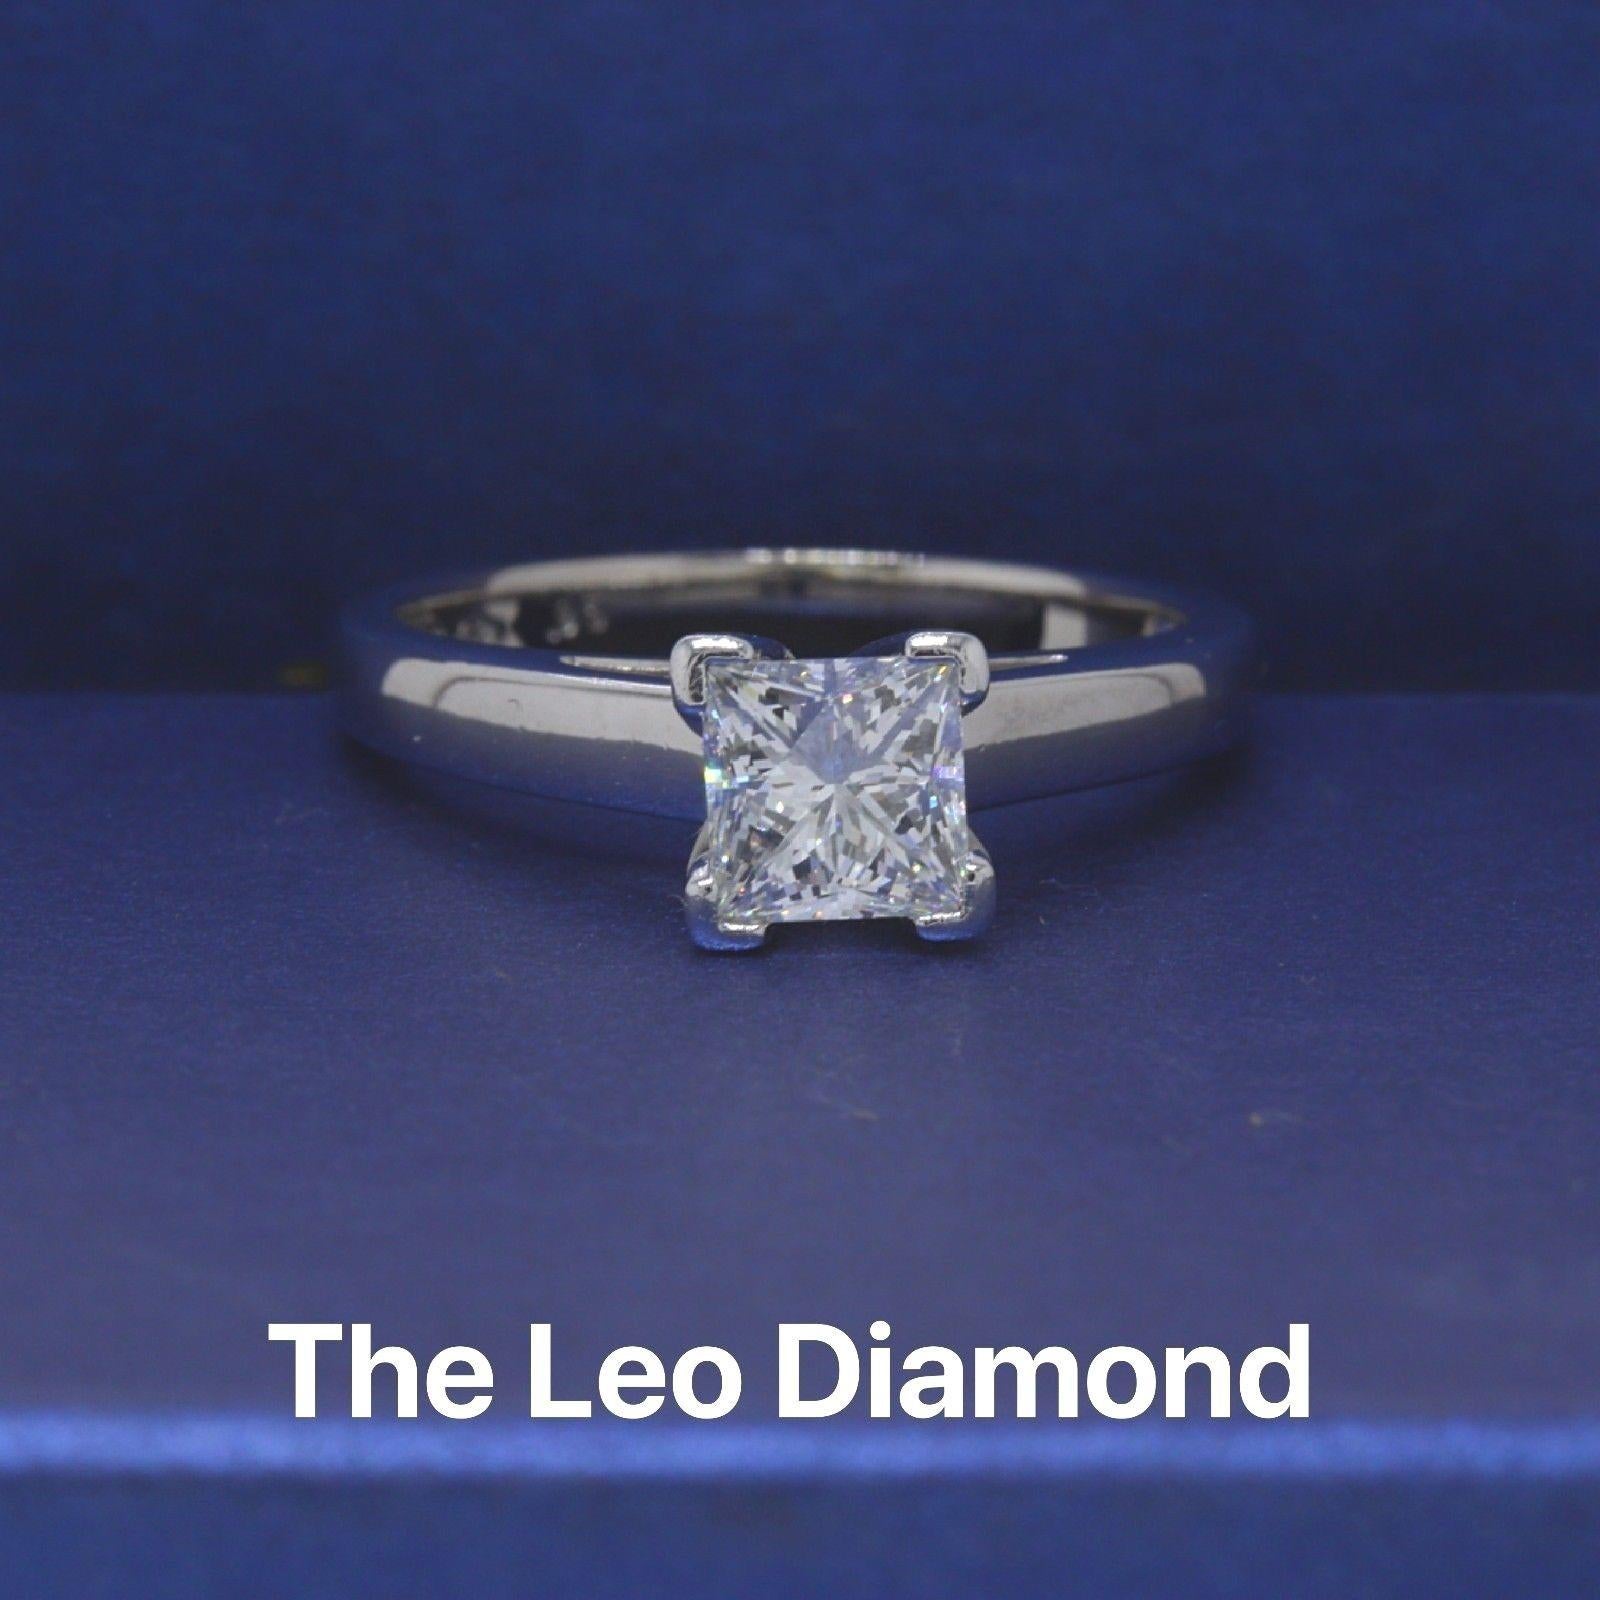 LEO DIAMOND
Style: Solitaire
Serial Number: LEO 2008450S
Metal: 14KT White Gold
Size:  6.75 (sizable)
Total Carat Weight:  0.95CTS
Diamond Shape: LEO Princess
Diamond Color & Clarity: H / SI1
Comments: Diamond is Laser Inscribed 